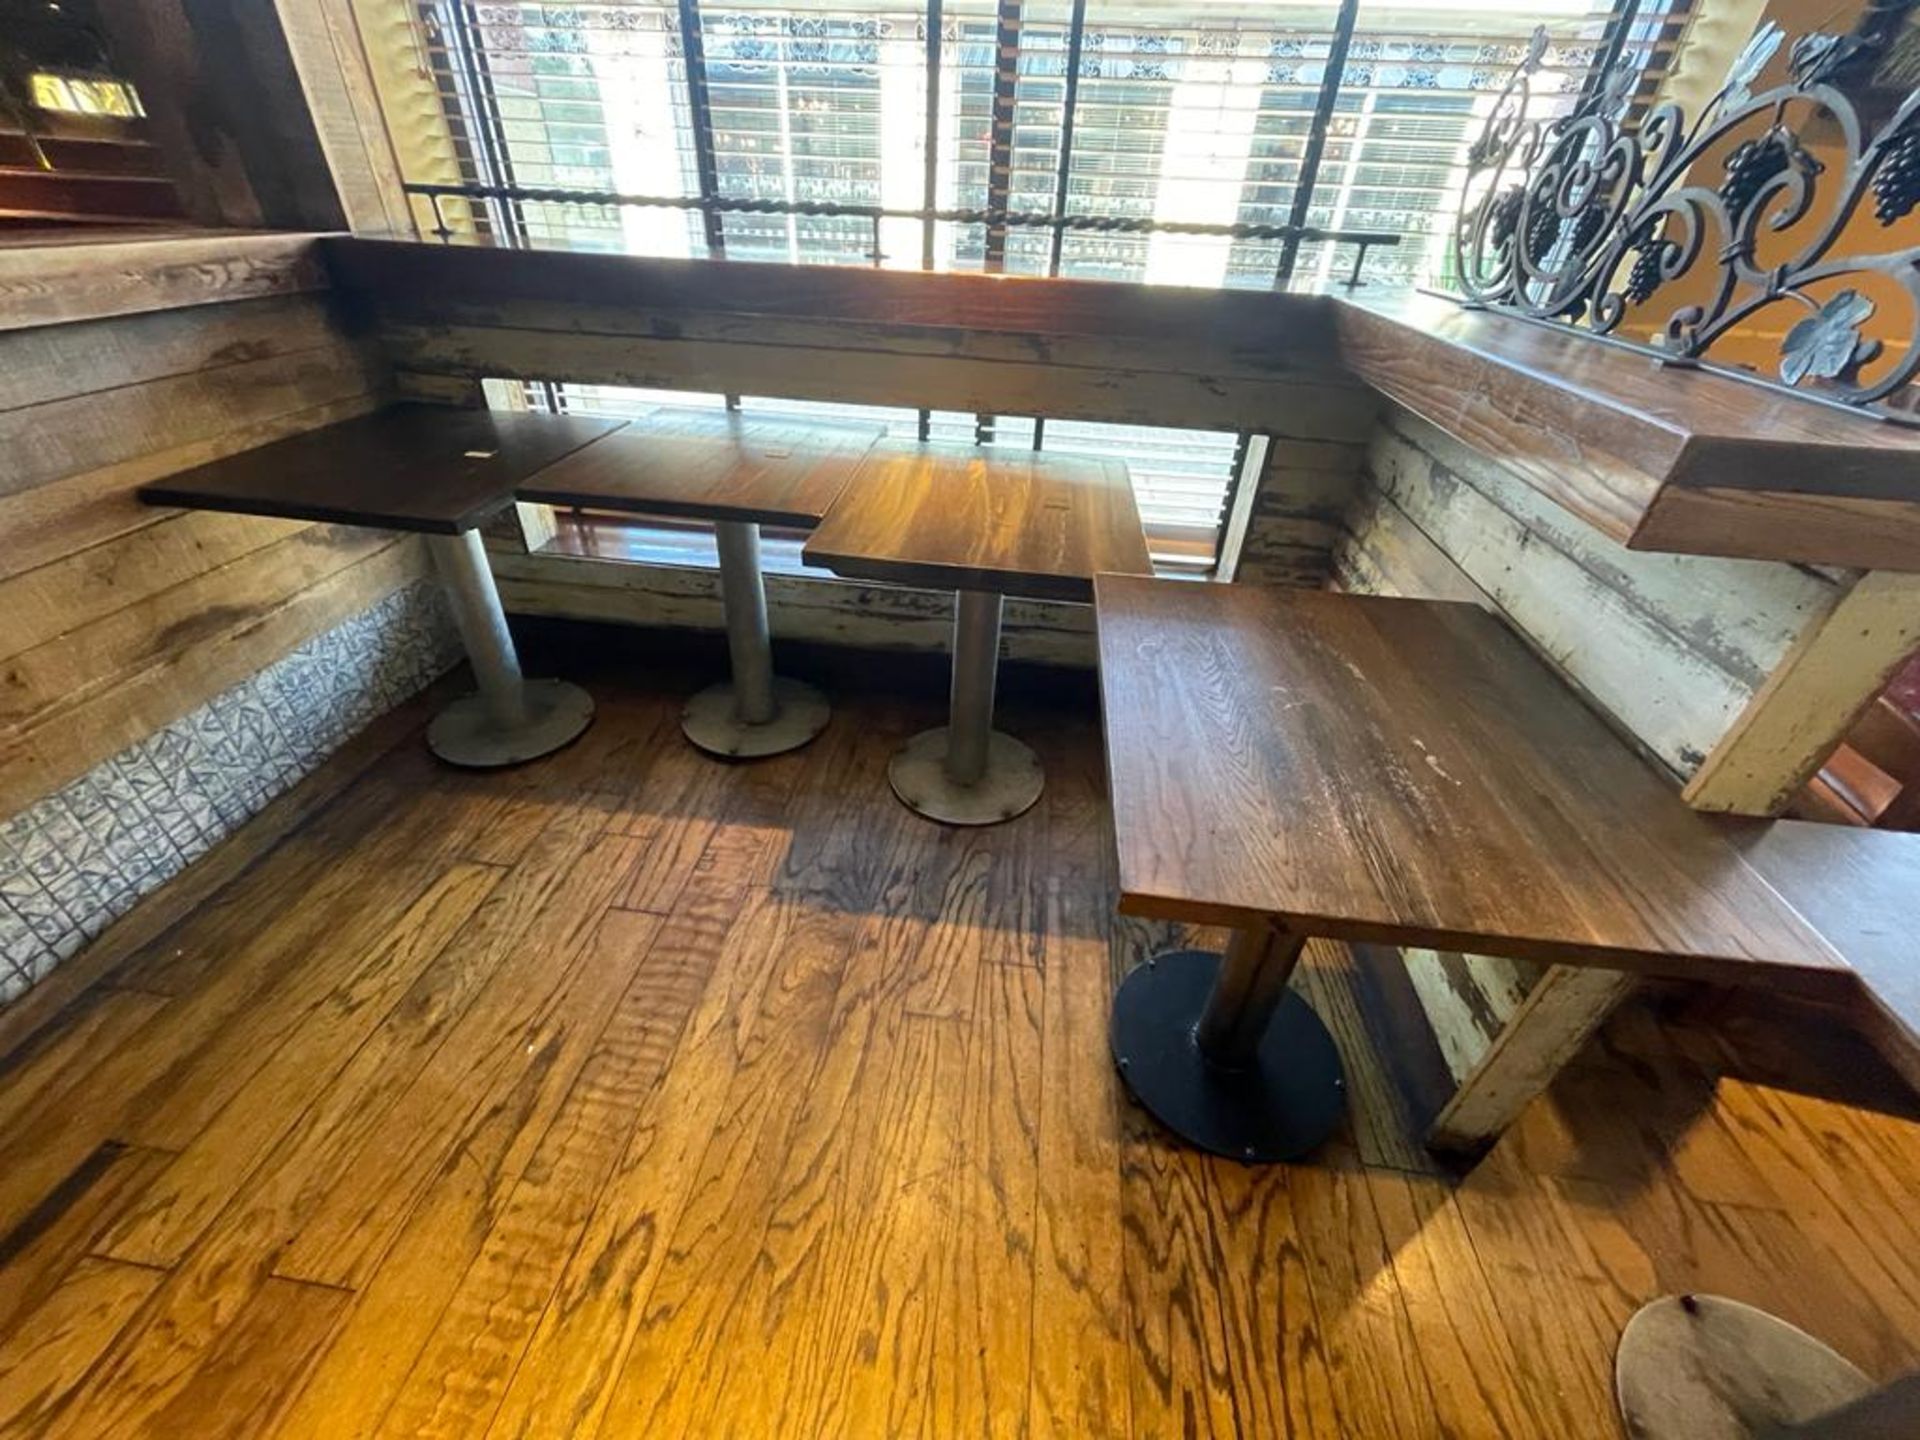 4 x Restaurant Dining Tables Featuring Industrial Style Bases and Wood Tops - Dimensions: H73 x - Image 7 of 9